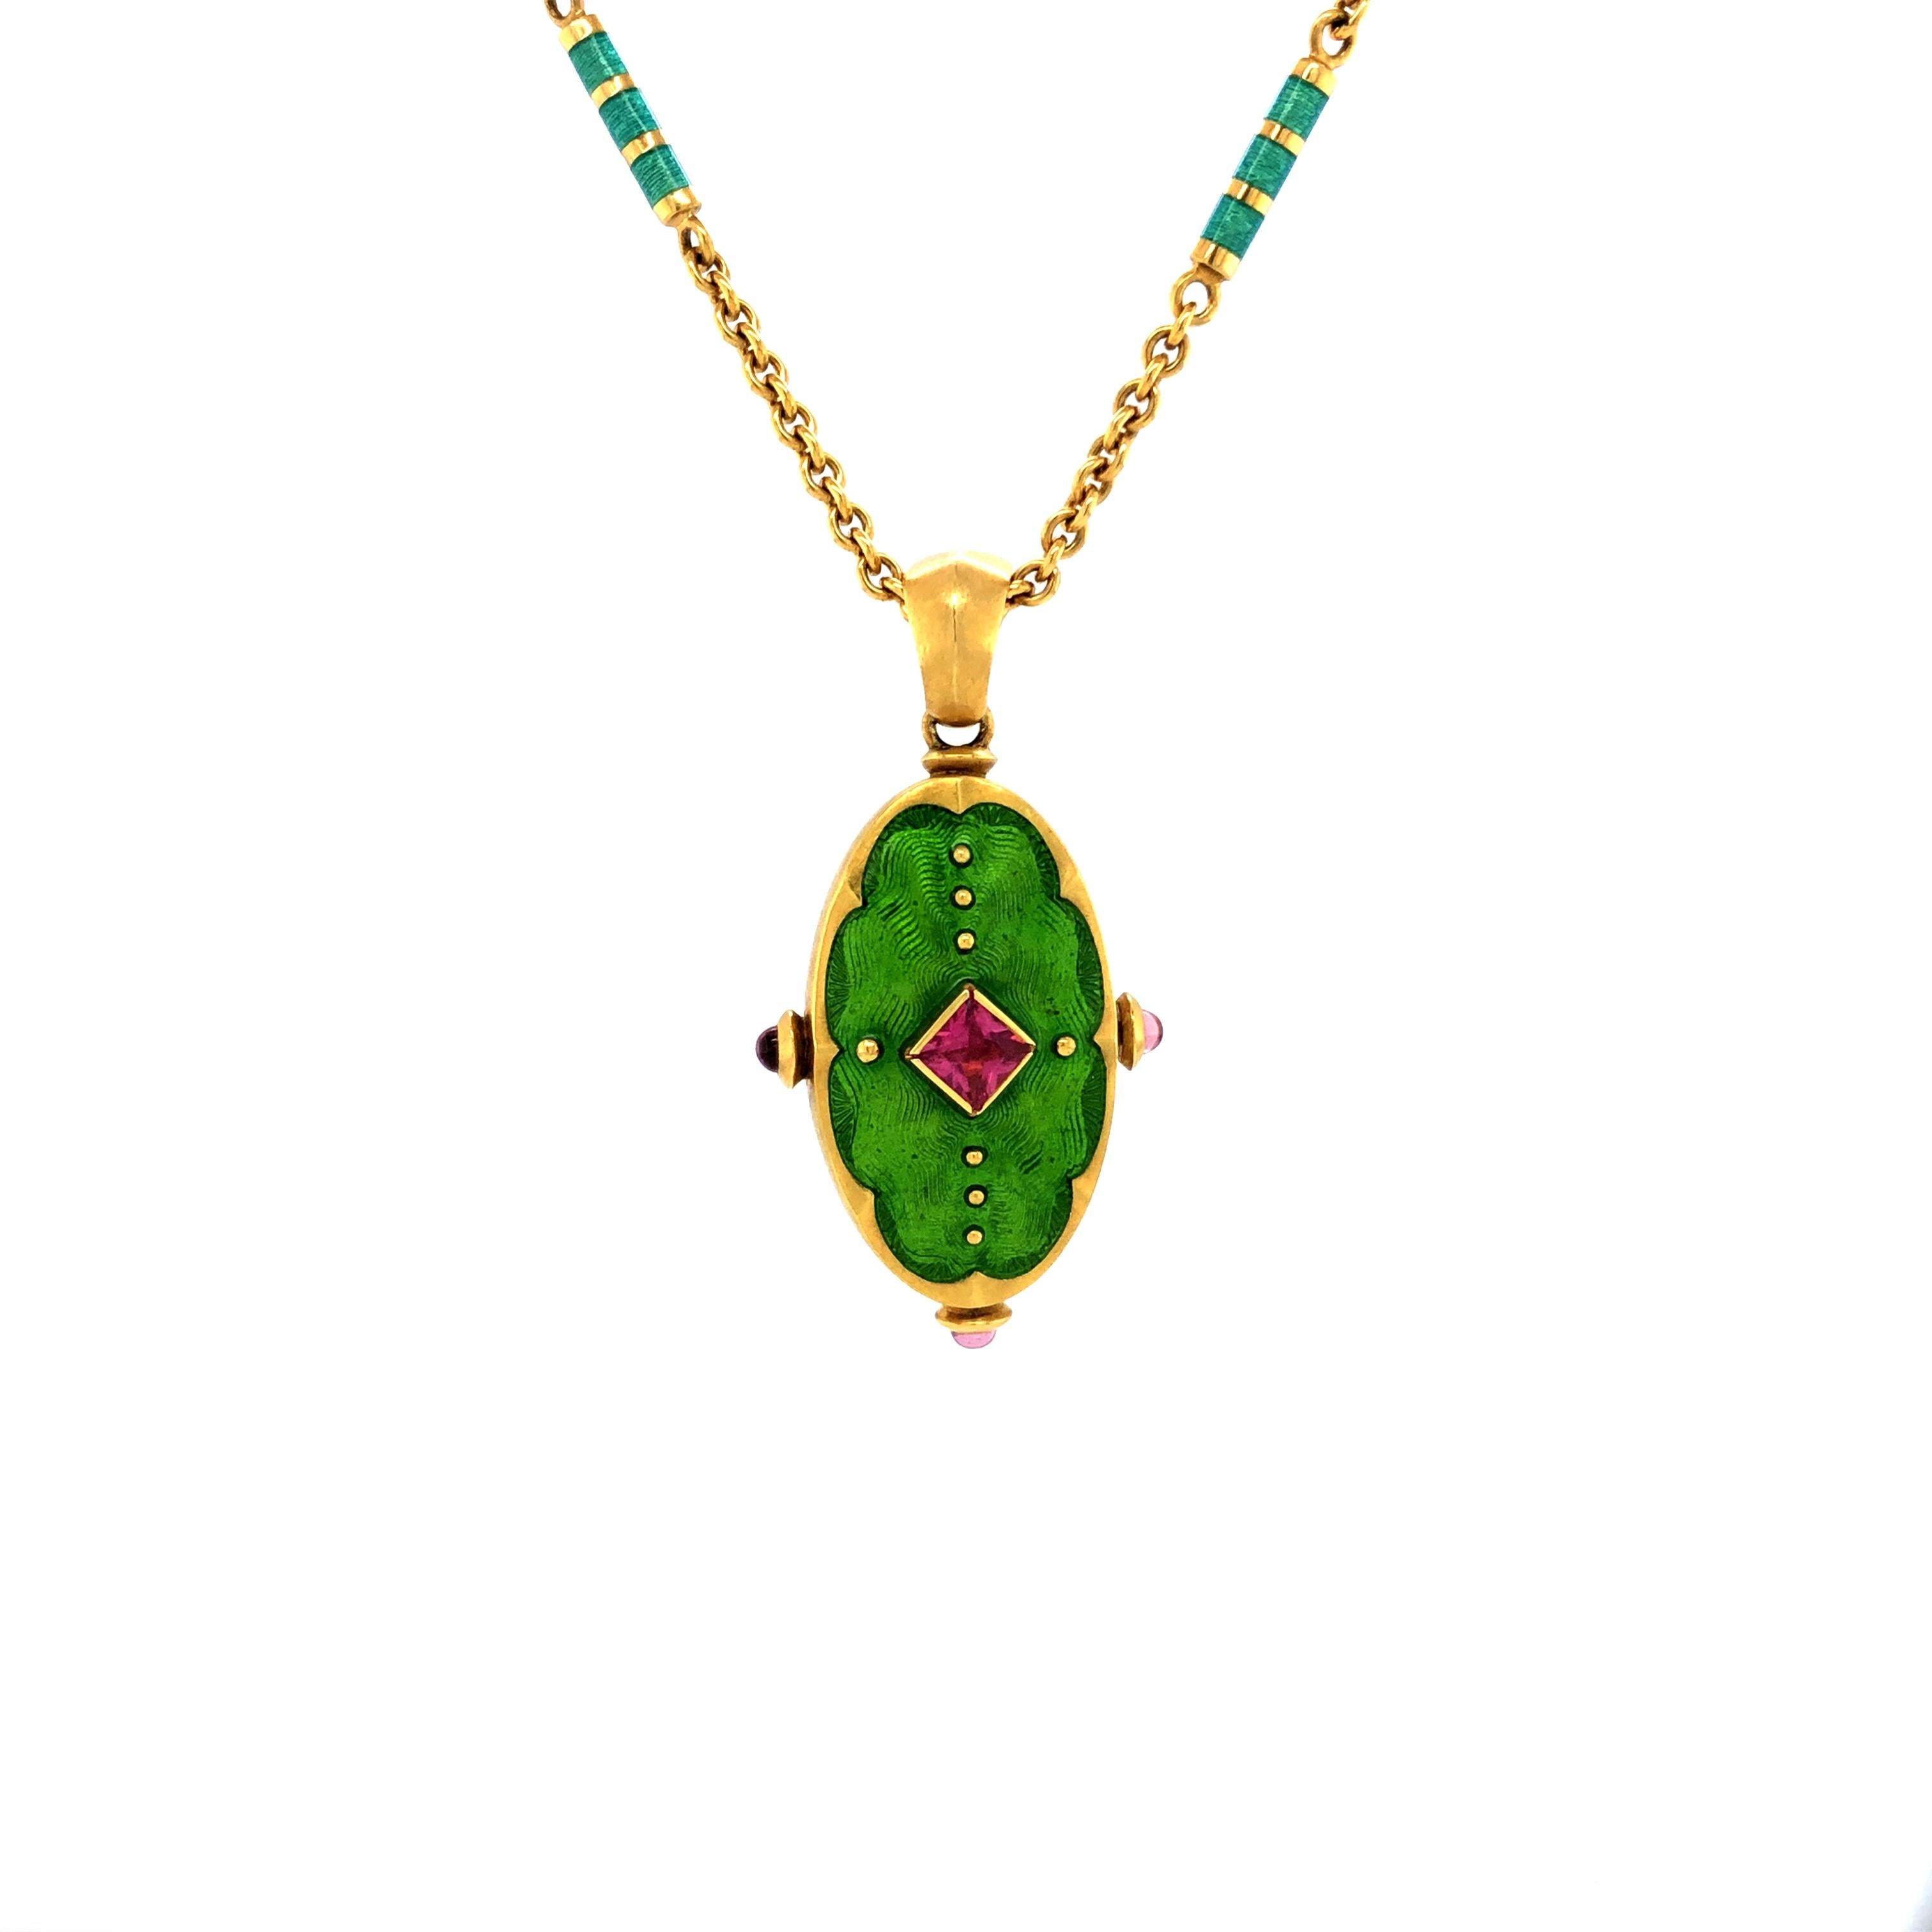 Victor Mayer oval locket pendant 18k yellow gold, matt vintage finish, Romance Collection, apple green vitreous enamel, guilloche, 1 rubellite (pink tourmaline), 3 cabochon rubellite, measurements app. 38.0 mm x 19.5 mm

About the creator Victor